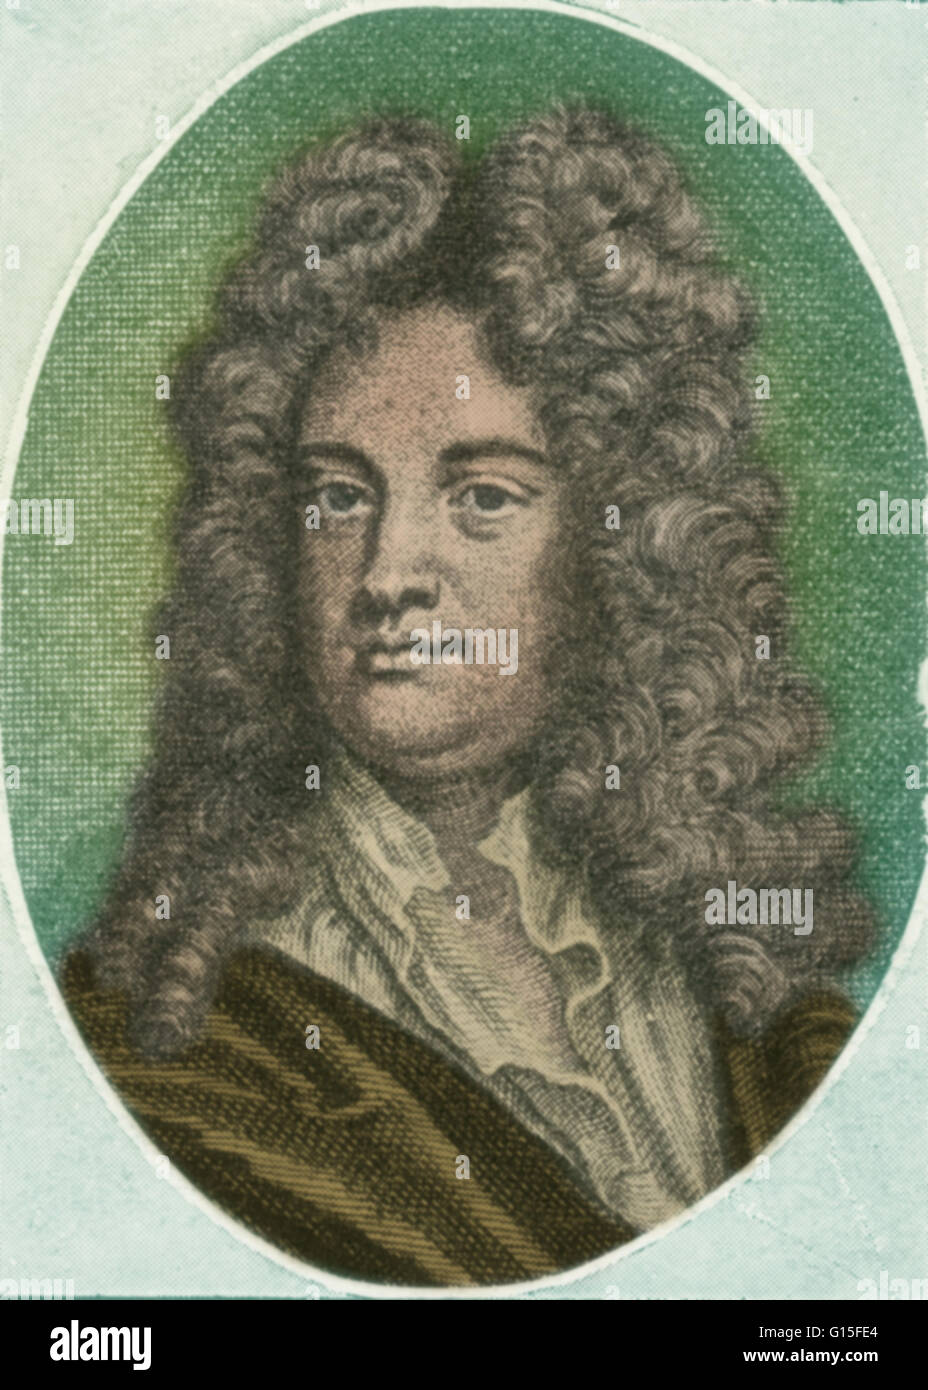 Nicholas Rowe (1674-1718), English dramatist, poet and miscellaneous writer, was appointed Poet Laureate in 1715. Stock Photo